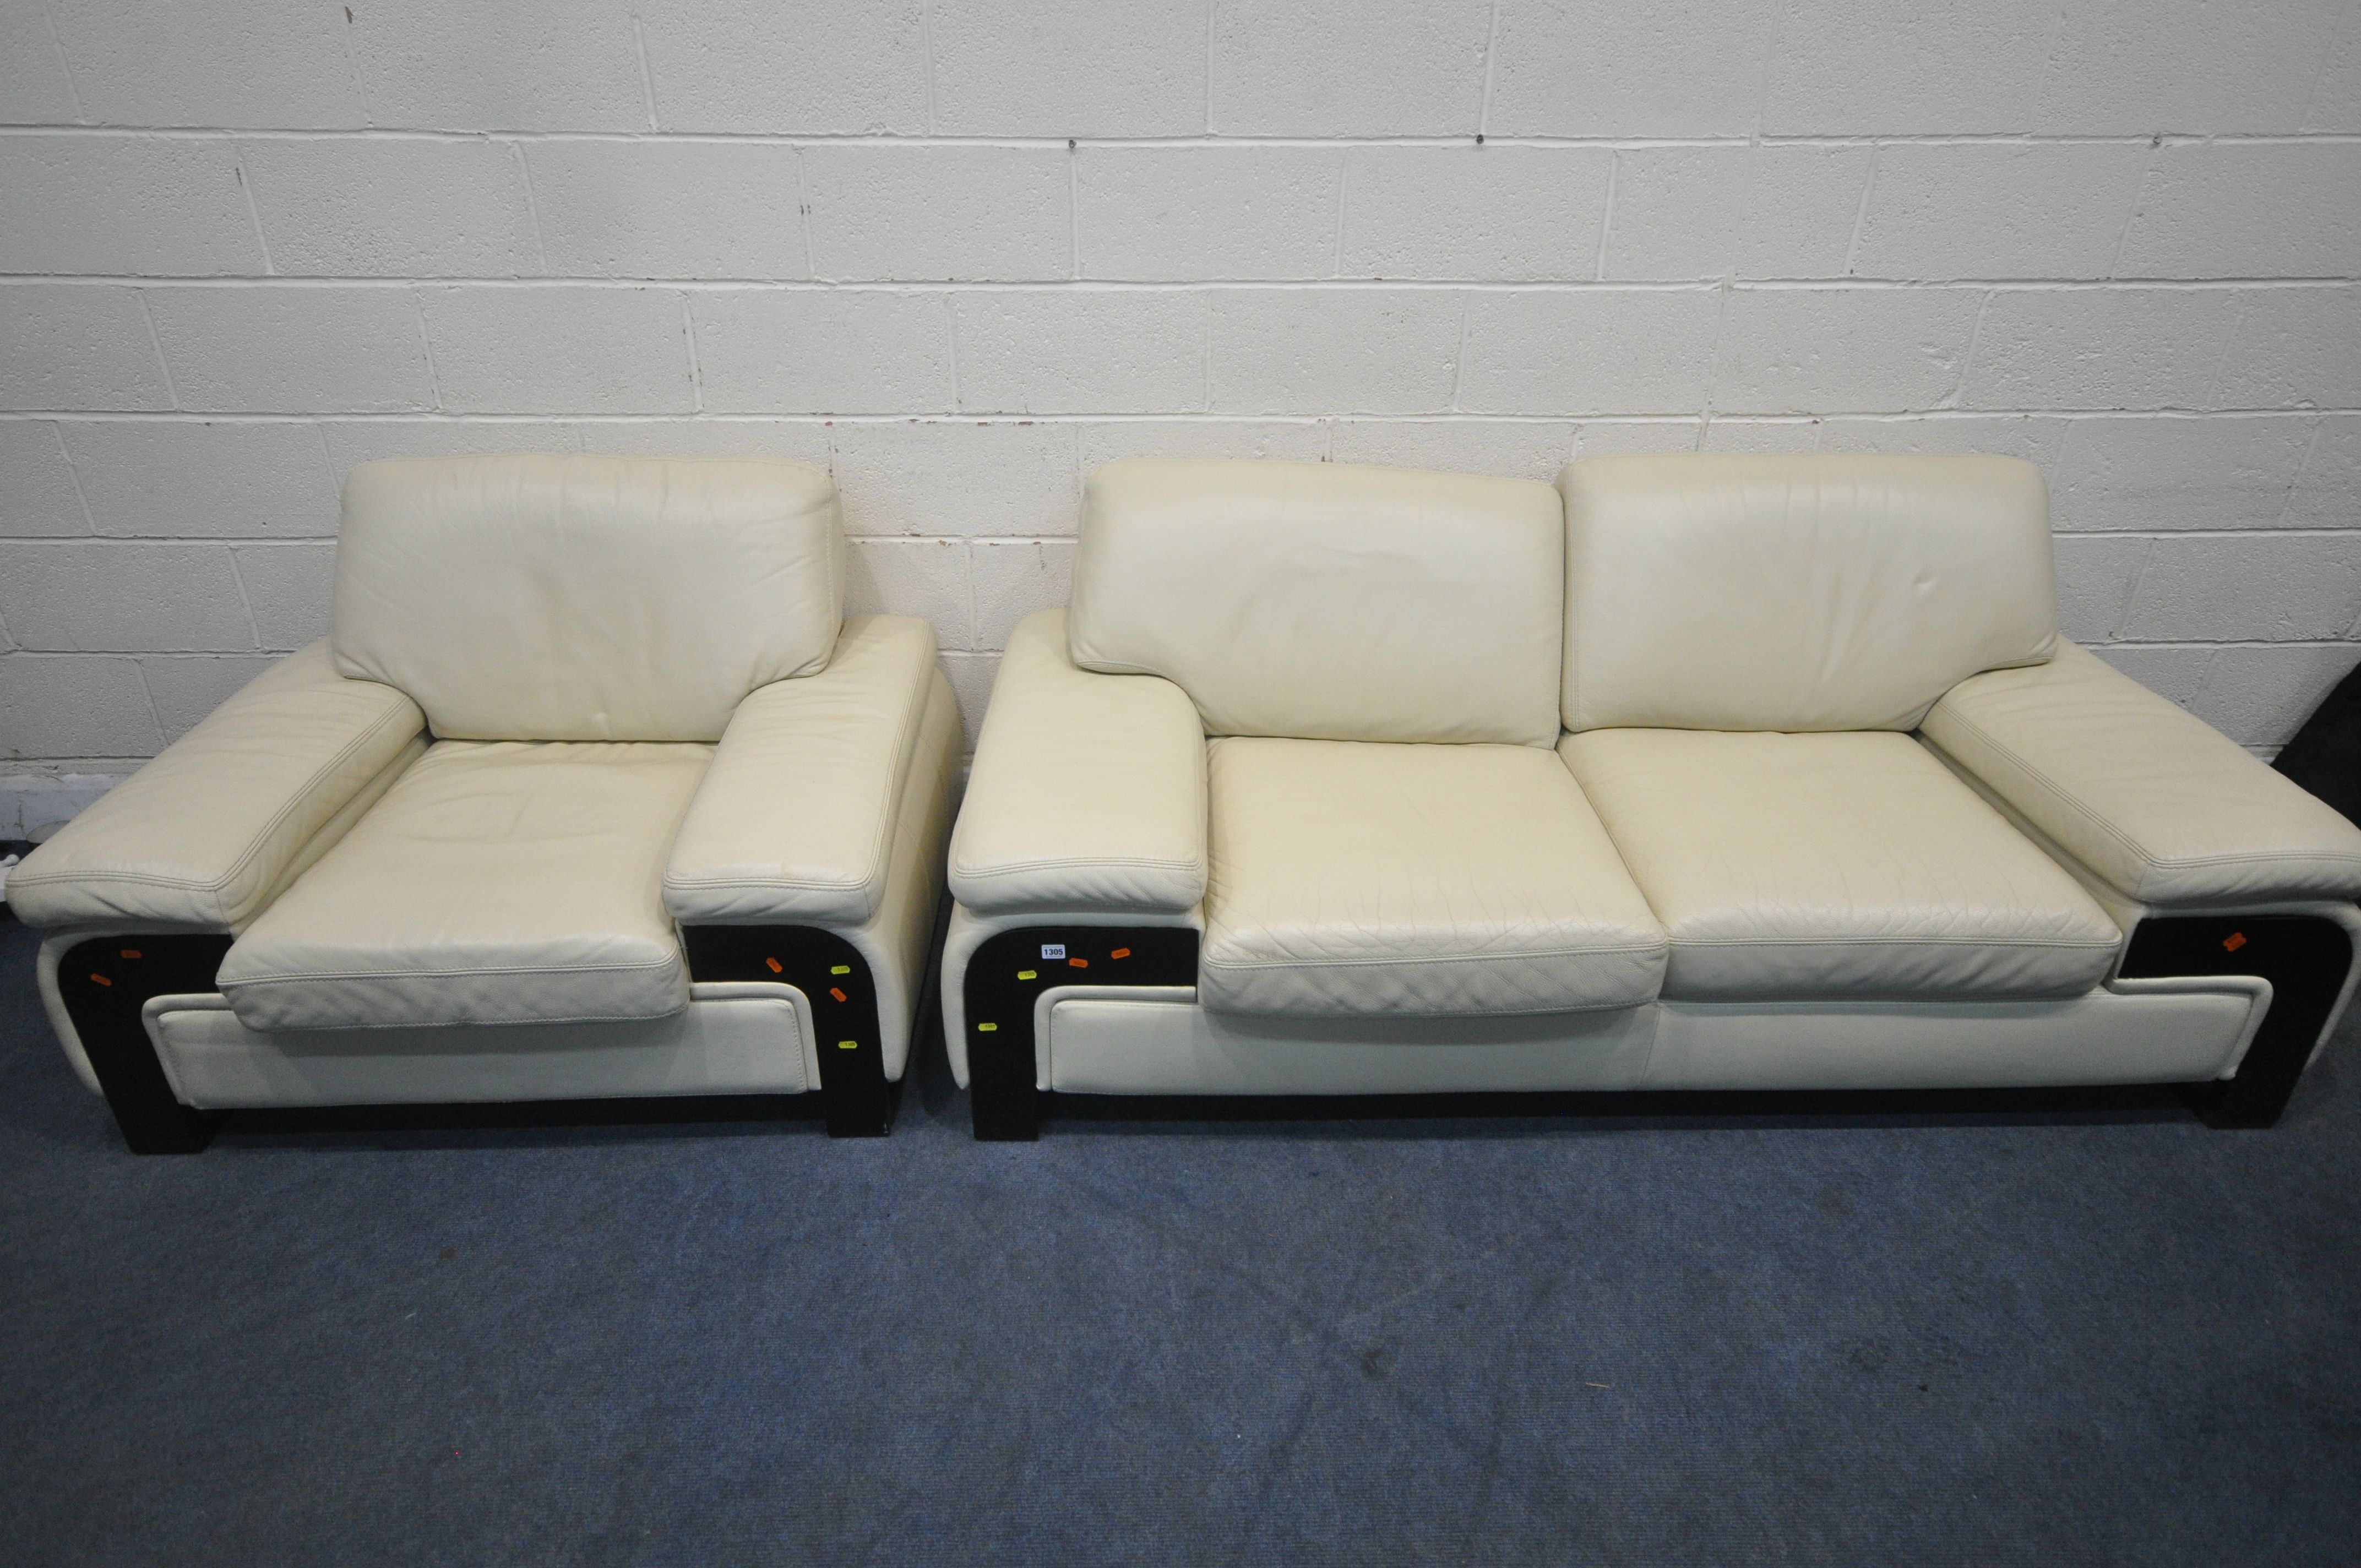 FERRARI DIVANI, AN ITALIAN CREAM LEATHER UPHOLSTERED TWO PIECE LOUNGE SUITE, comprising a two seater